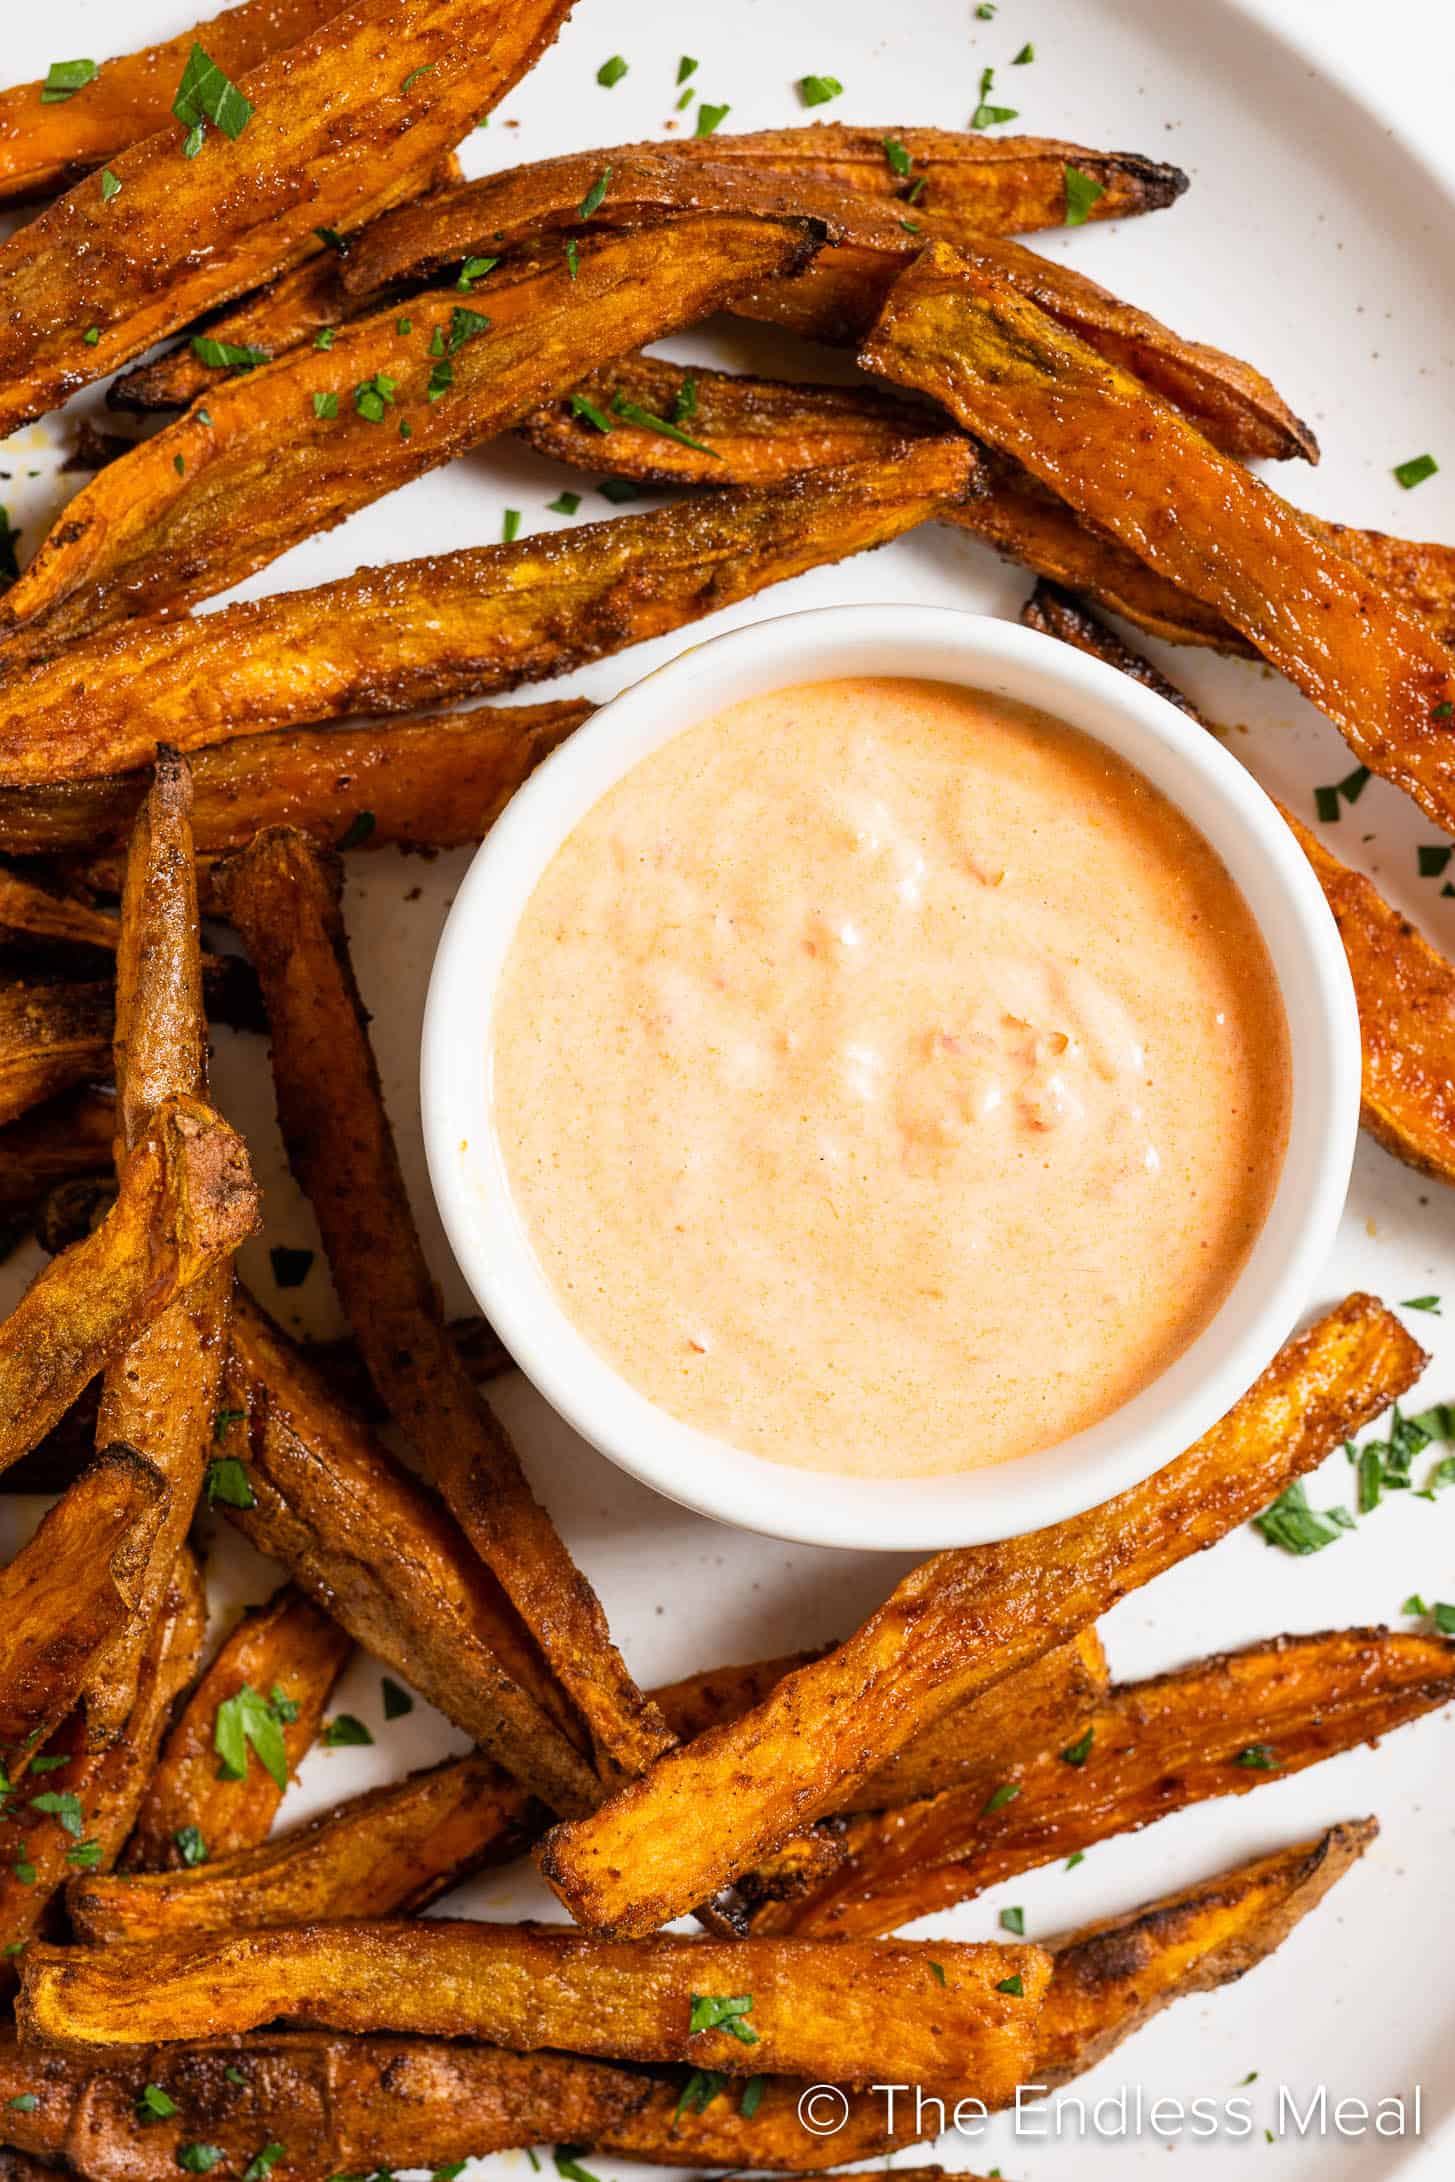 Harissa Mayo in a bowl with a plate of sweet potato fries